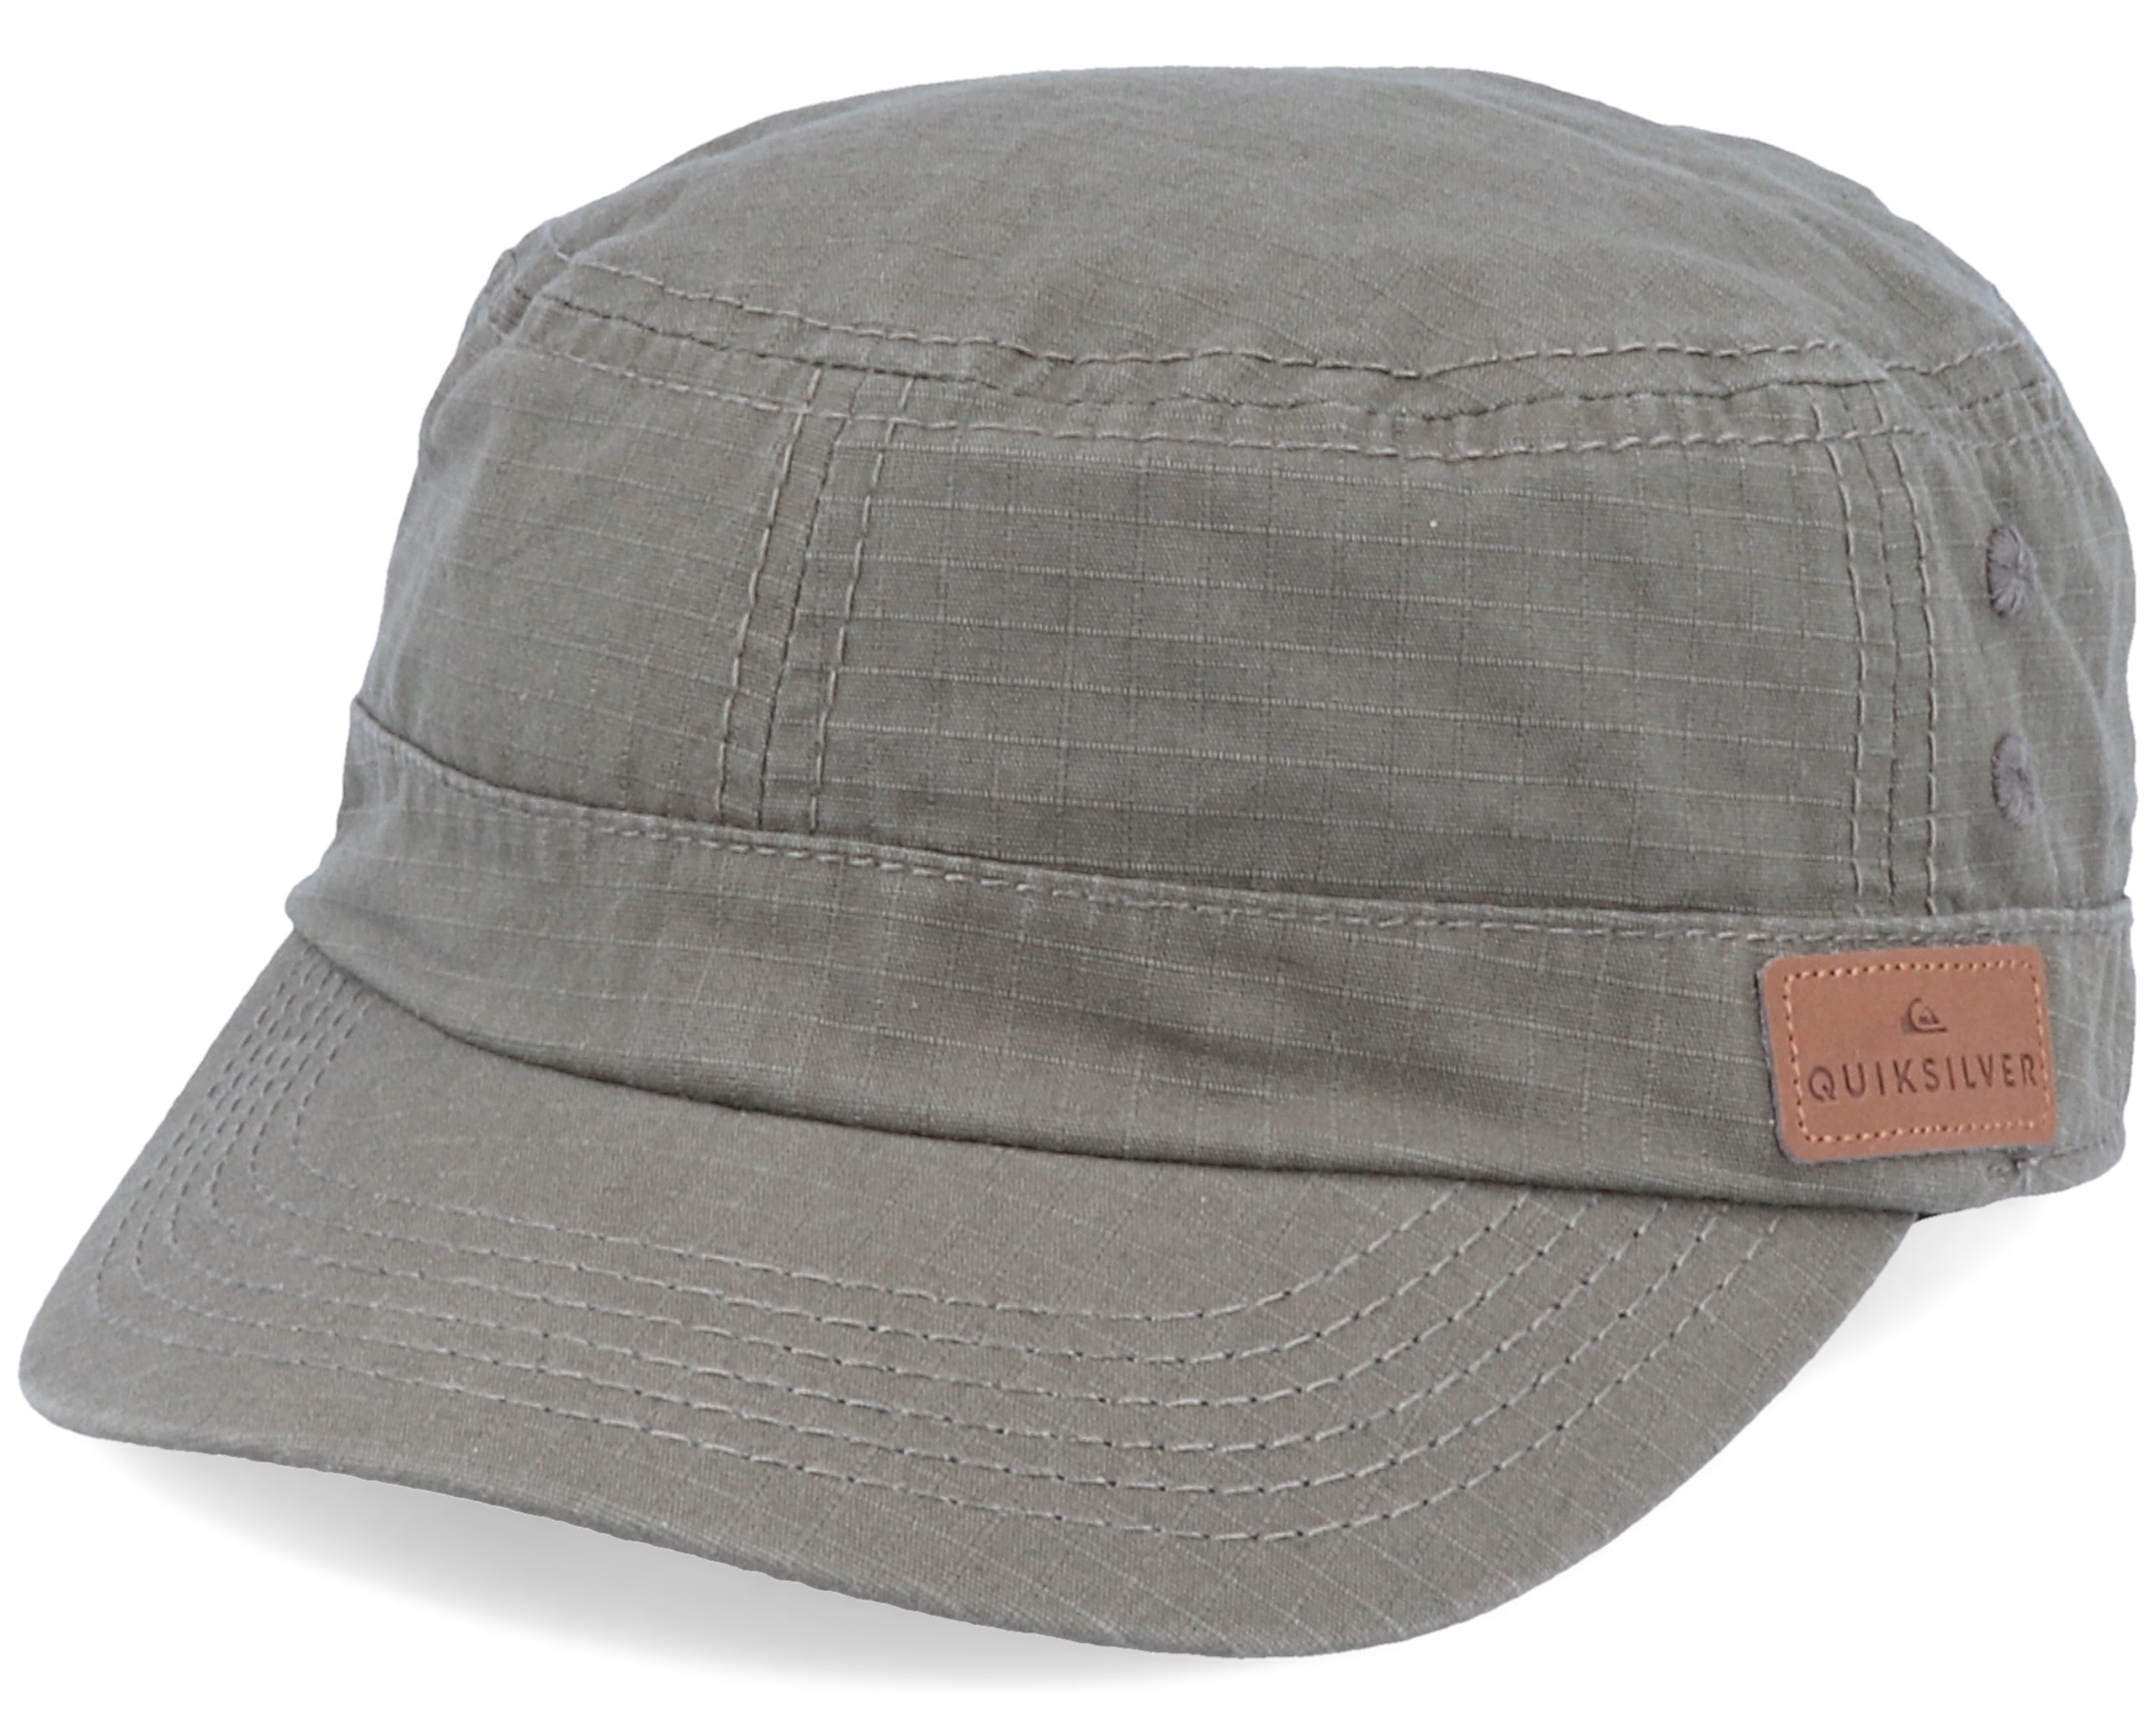 Renegade 2 Olive Army - Quiksilver cap